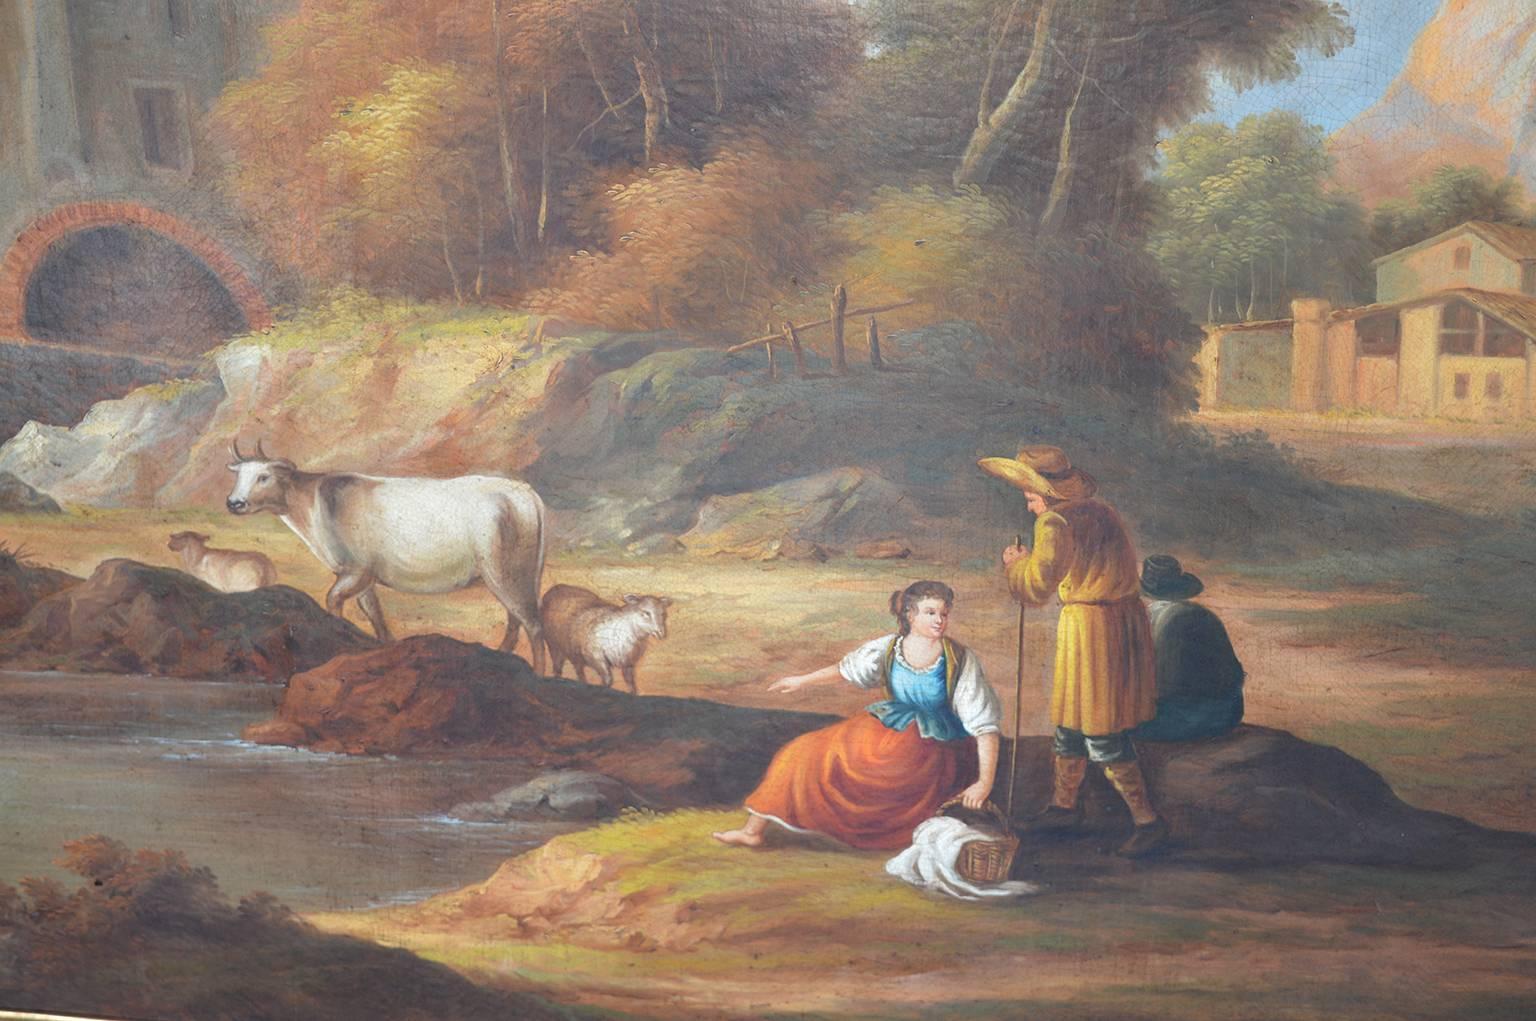 Large 19th century Italian landscape oil painting. The painting shows working life by the Italian river.